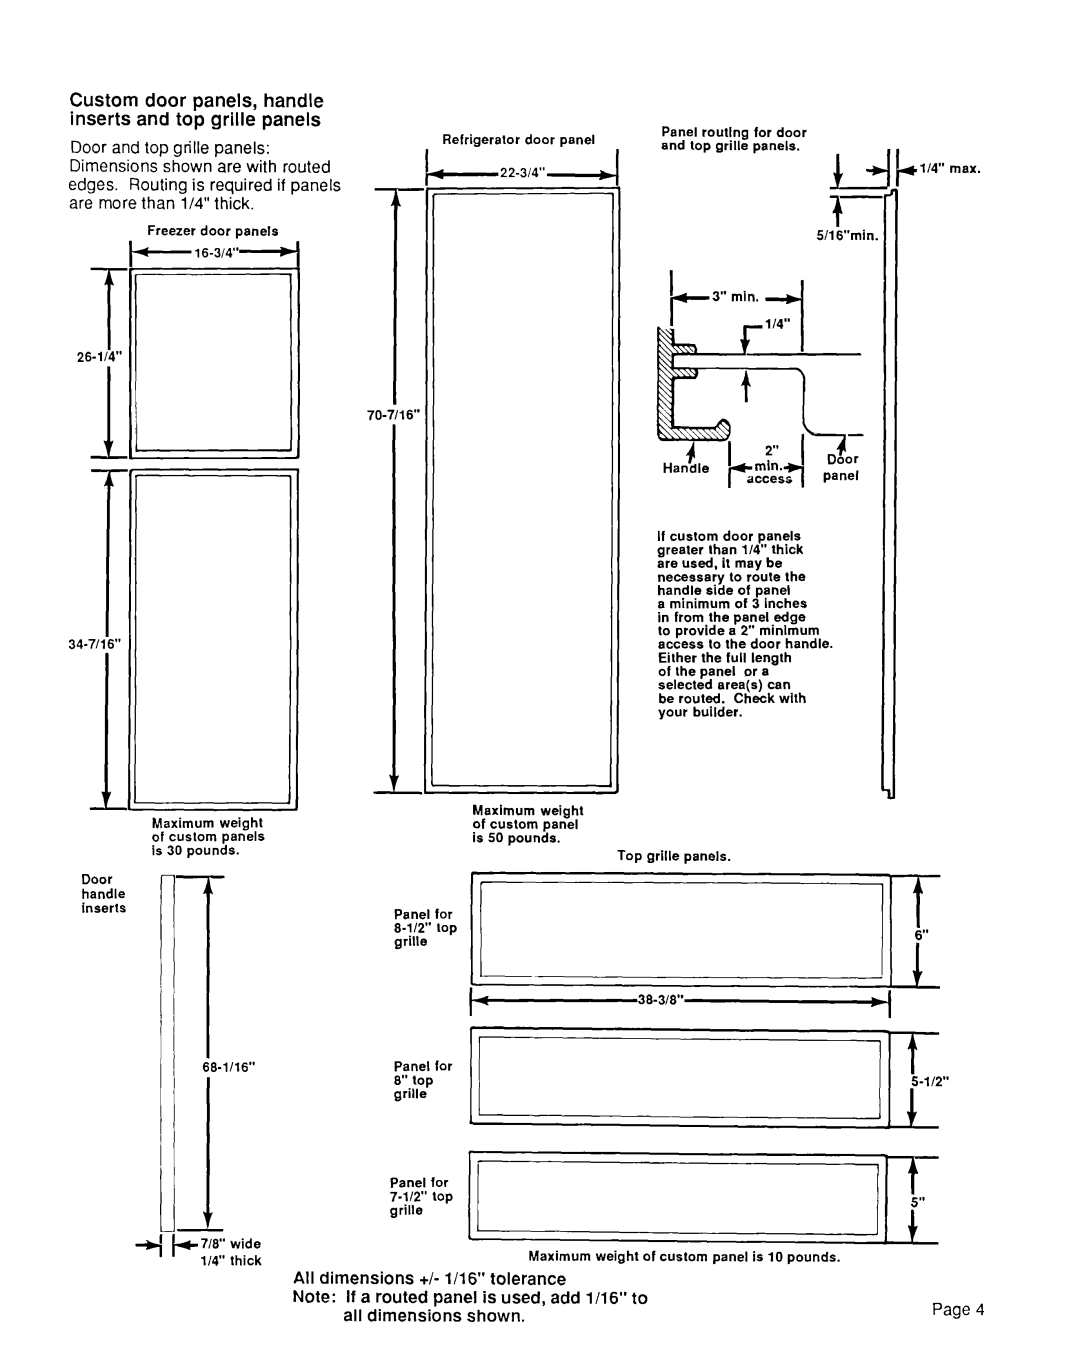 KitchenAid KSRF42DT All dimensions +/- 1116” tolerance, Note If a routed panel is used, add l/16” to, all dimensions shown 